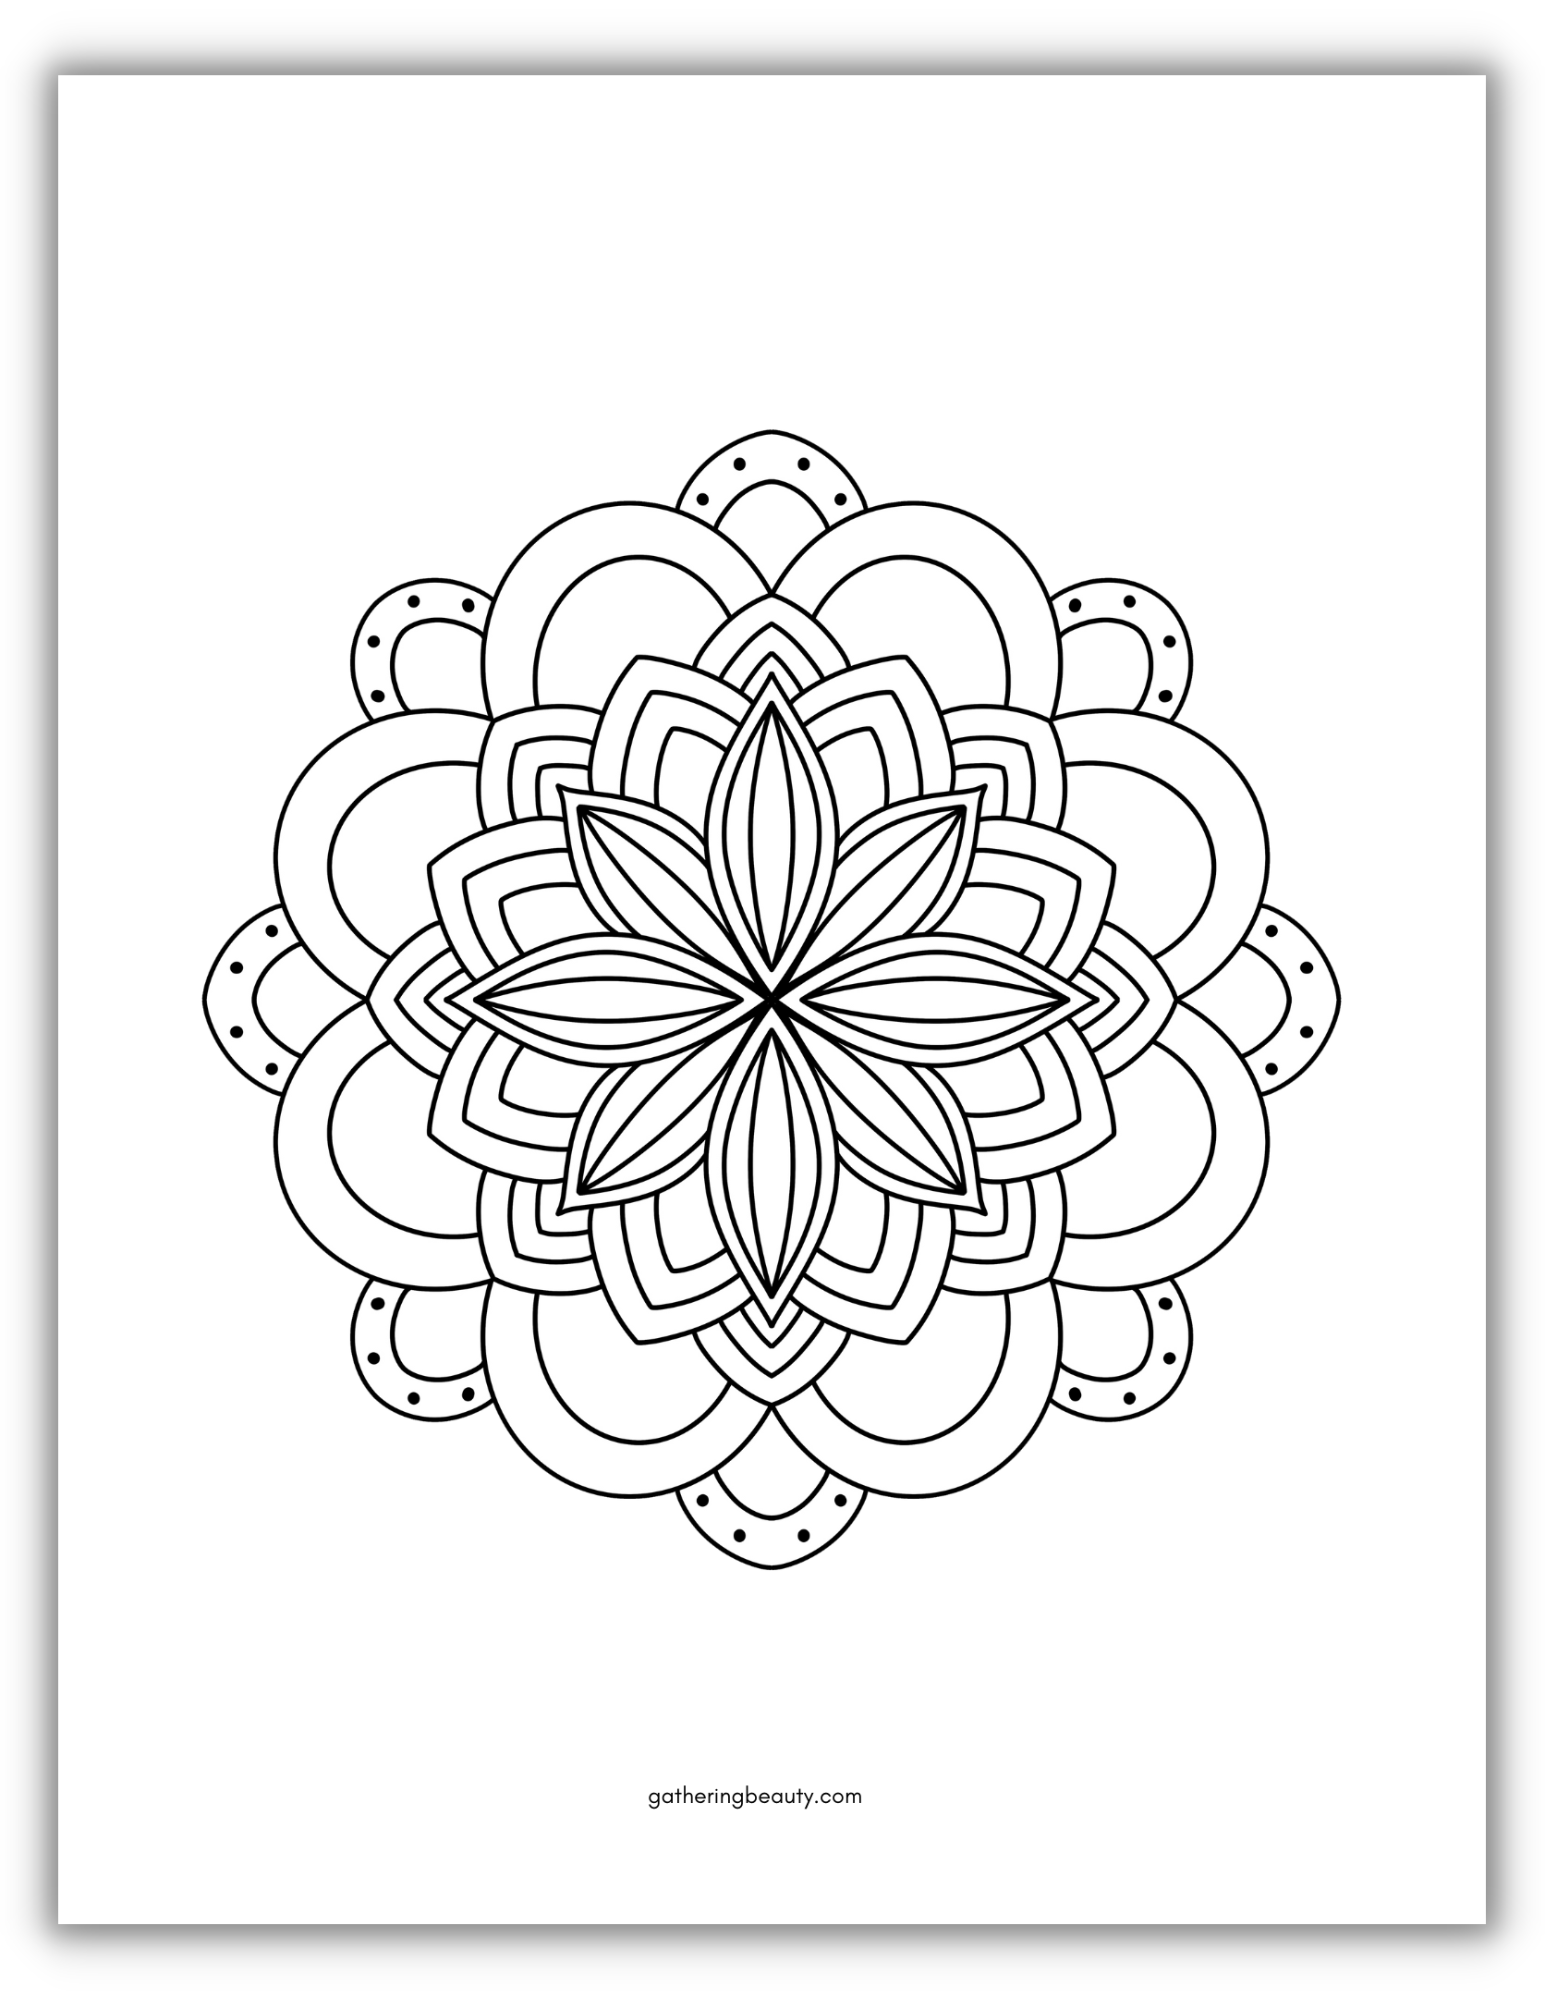 Free printable mandala coloring pages | FollowPics | Mandala coloring  pages, Heart coloring pages, Pattern coloring pages